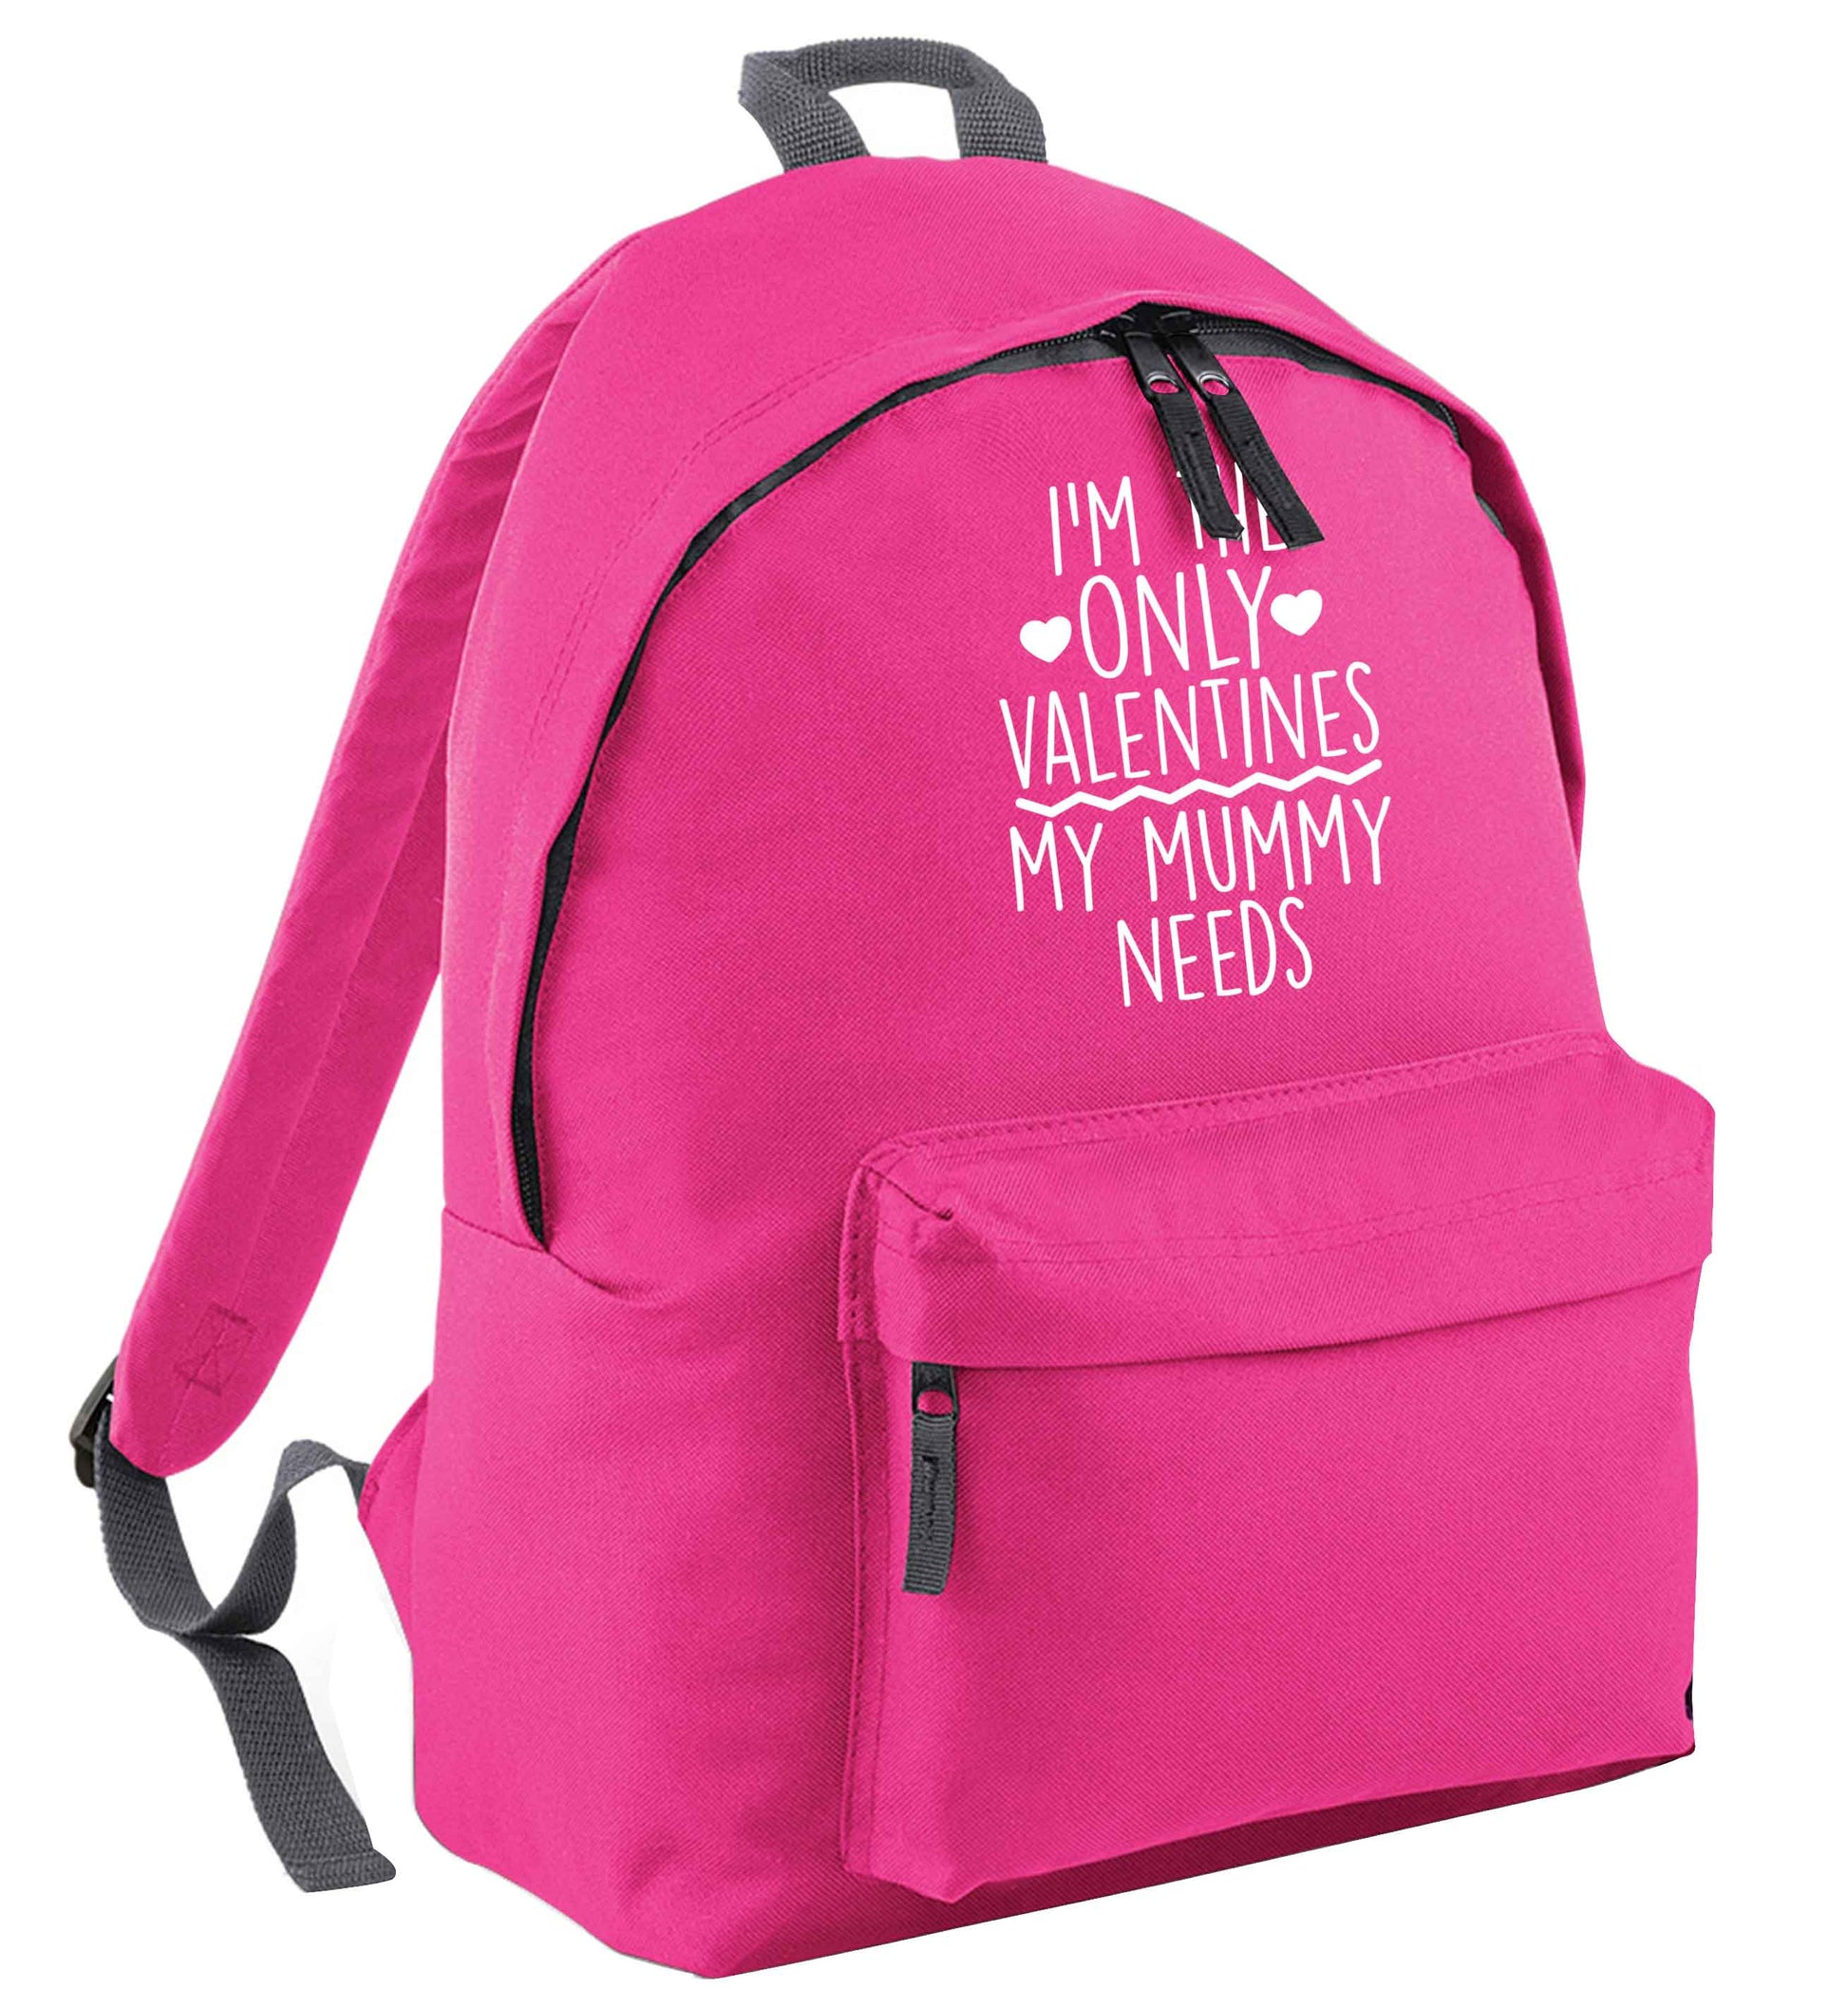 I'm the only valentines my mummy needs pink adults backpack